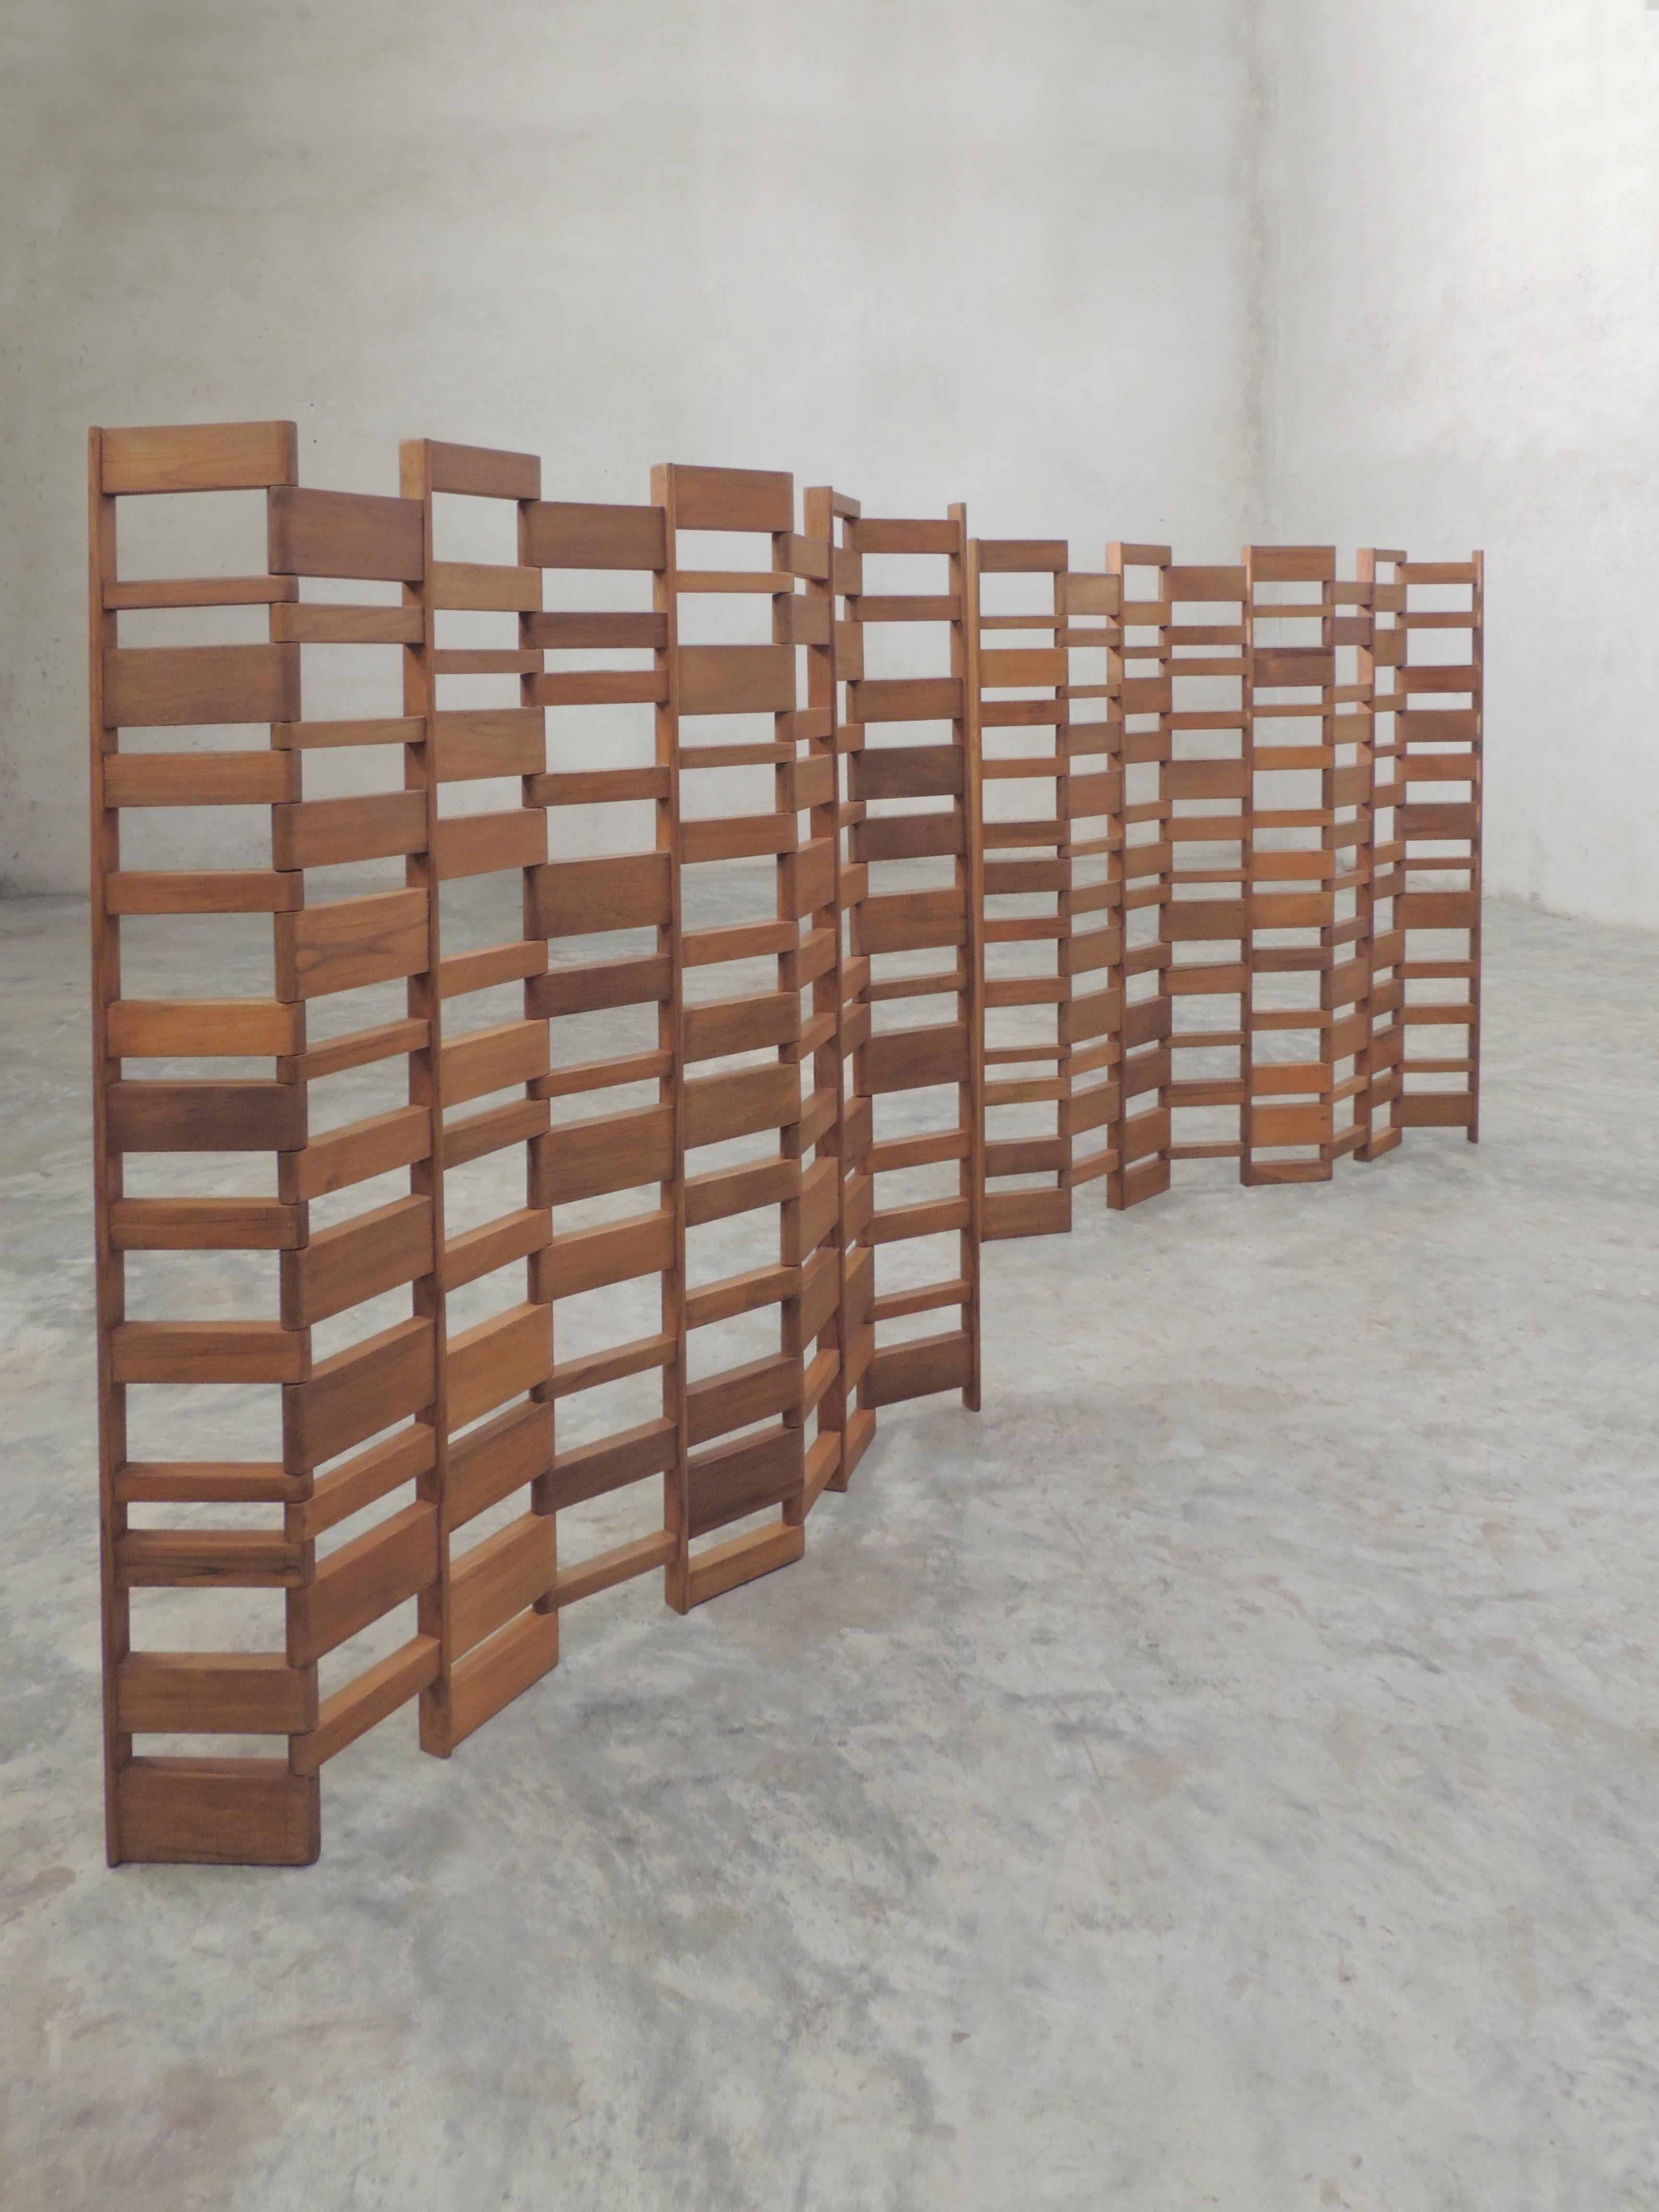 Room divider


Dimensions (cm): H 160.0 x W 155.5 when fully stretched
Material: Natural teak

